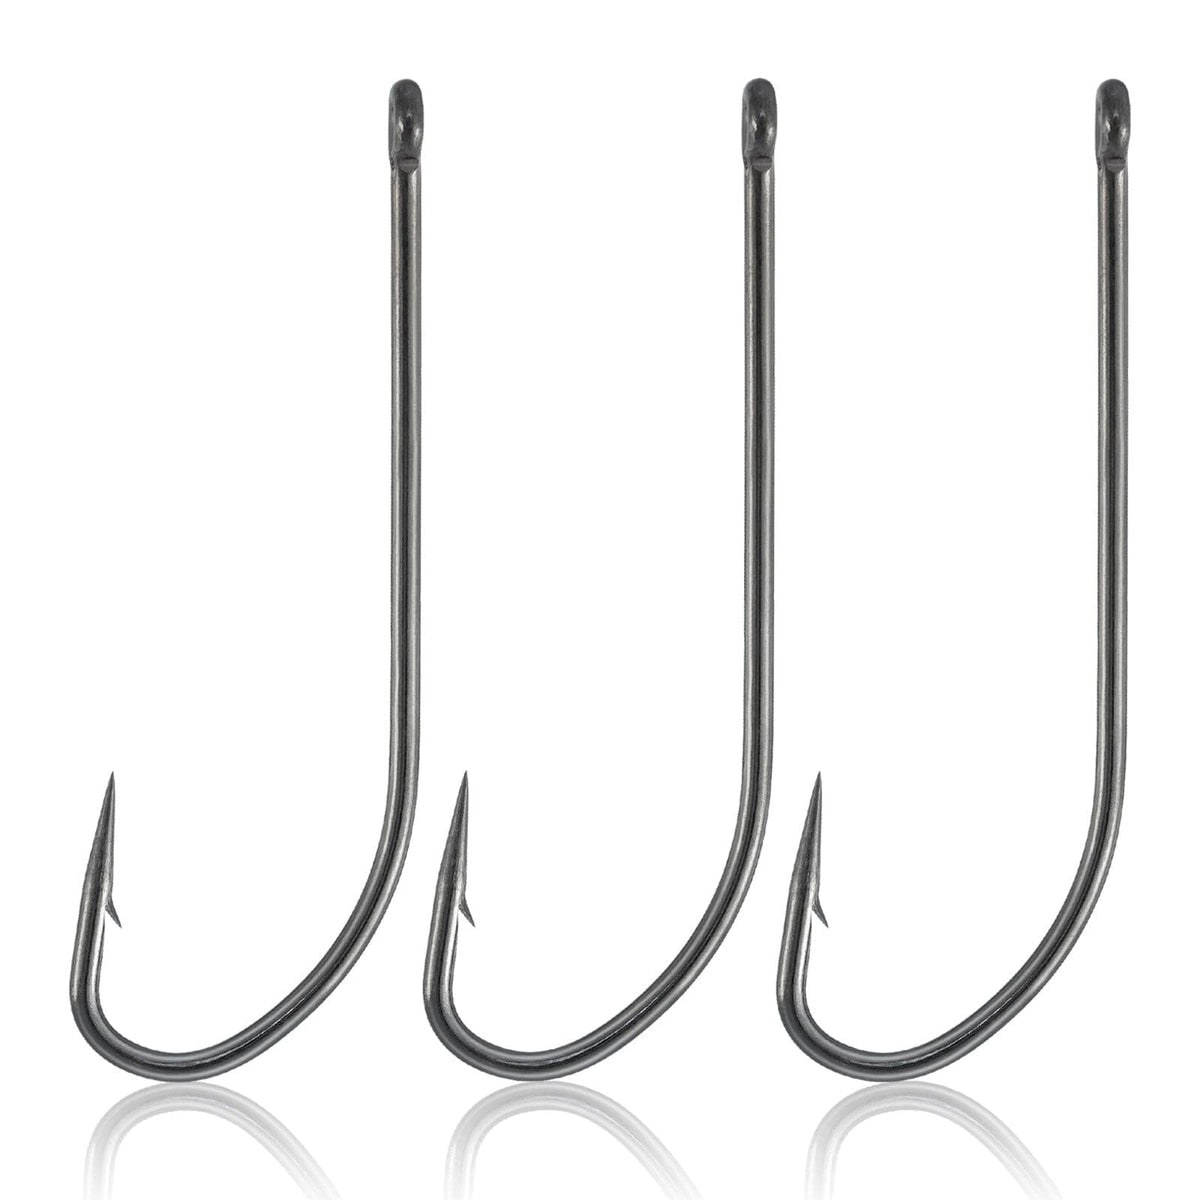 Dr.Fish 100pcs O'shaughnessy Hooks #10 to 10/0